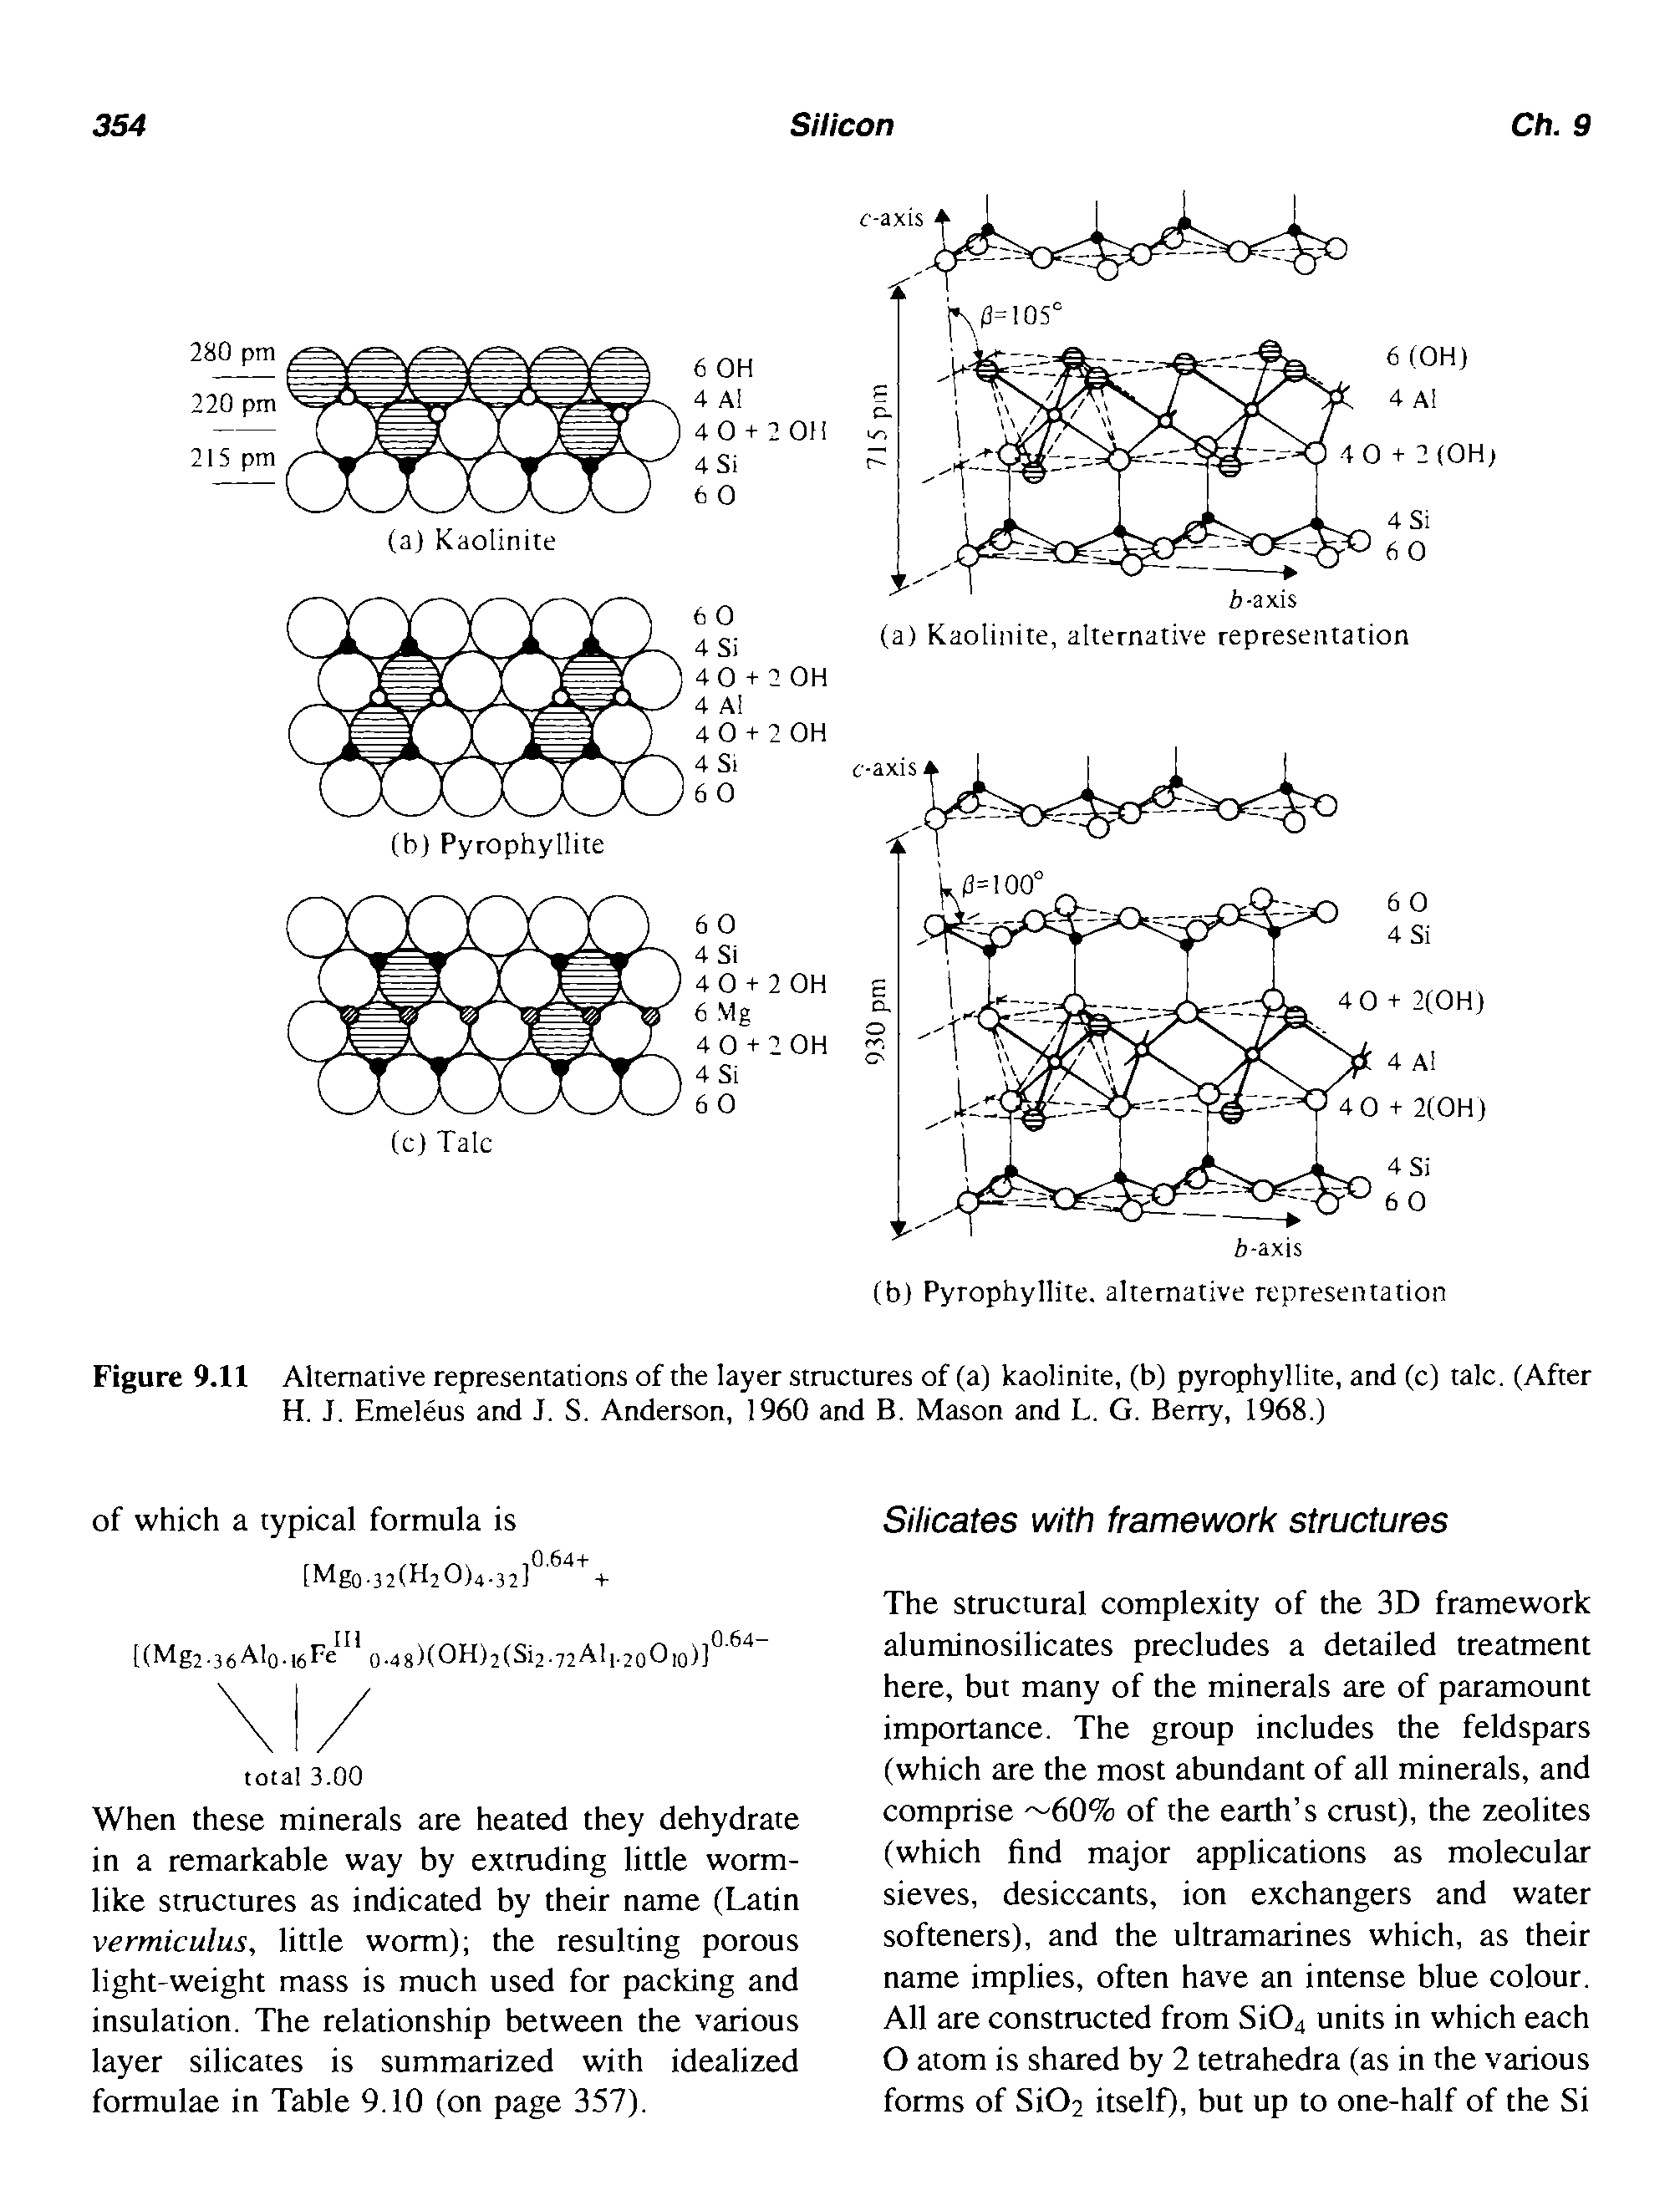 Figure 9.11 Alternative representations of the layer structures of (a) kaolinite, (b) pyrophyllite, and (c) talc. (After H. J. Emeleus and J. S. Anderson, 1960 and B. Mason and L. G. Berry, 1968.)...